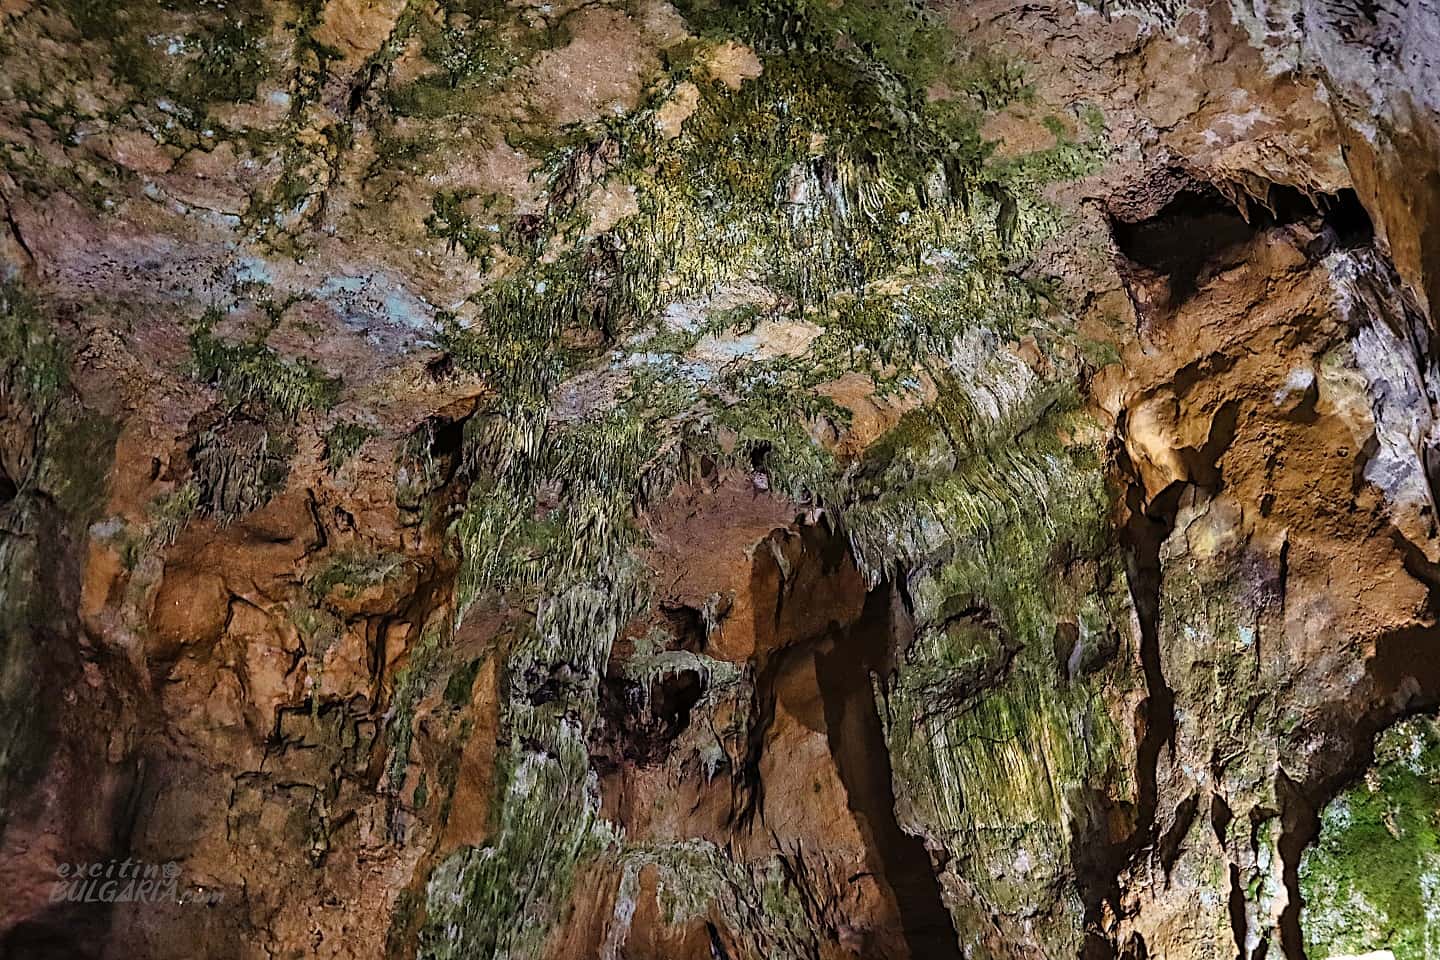 Formations in the Bacho Kiro cave